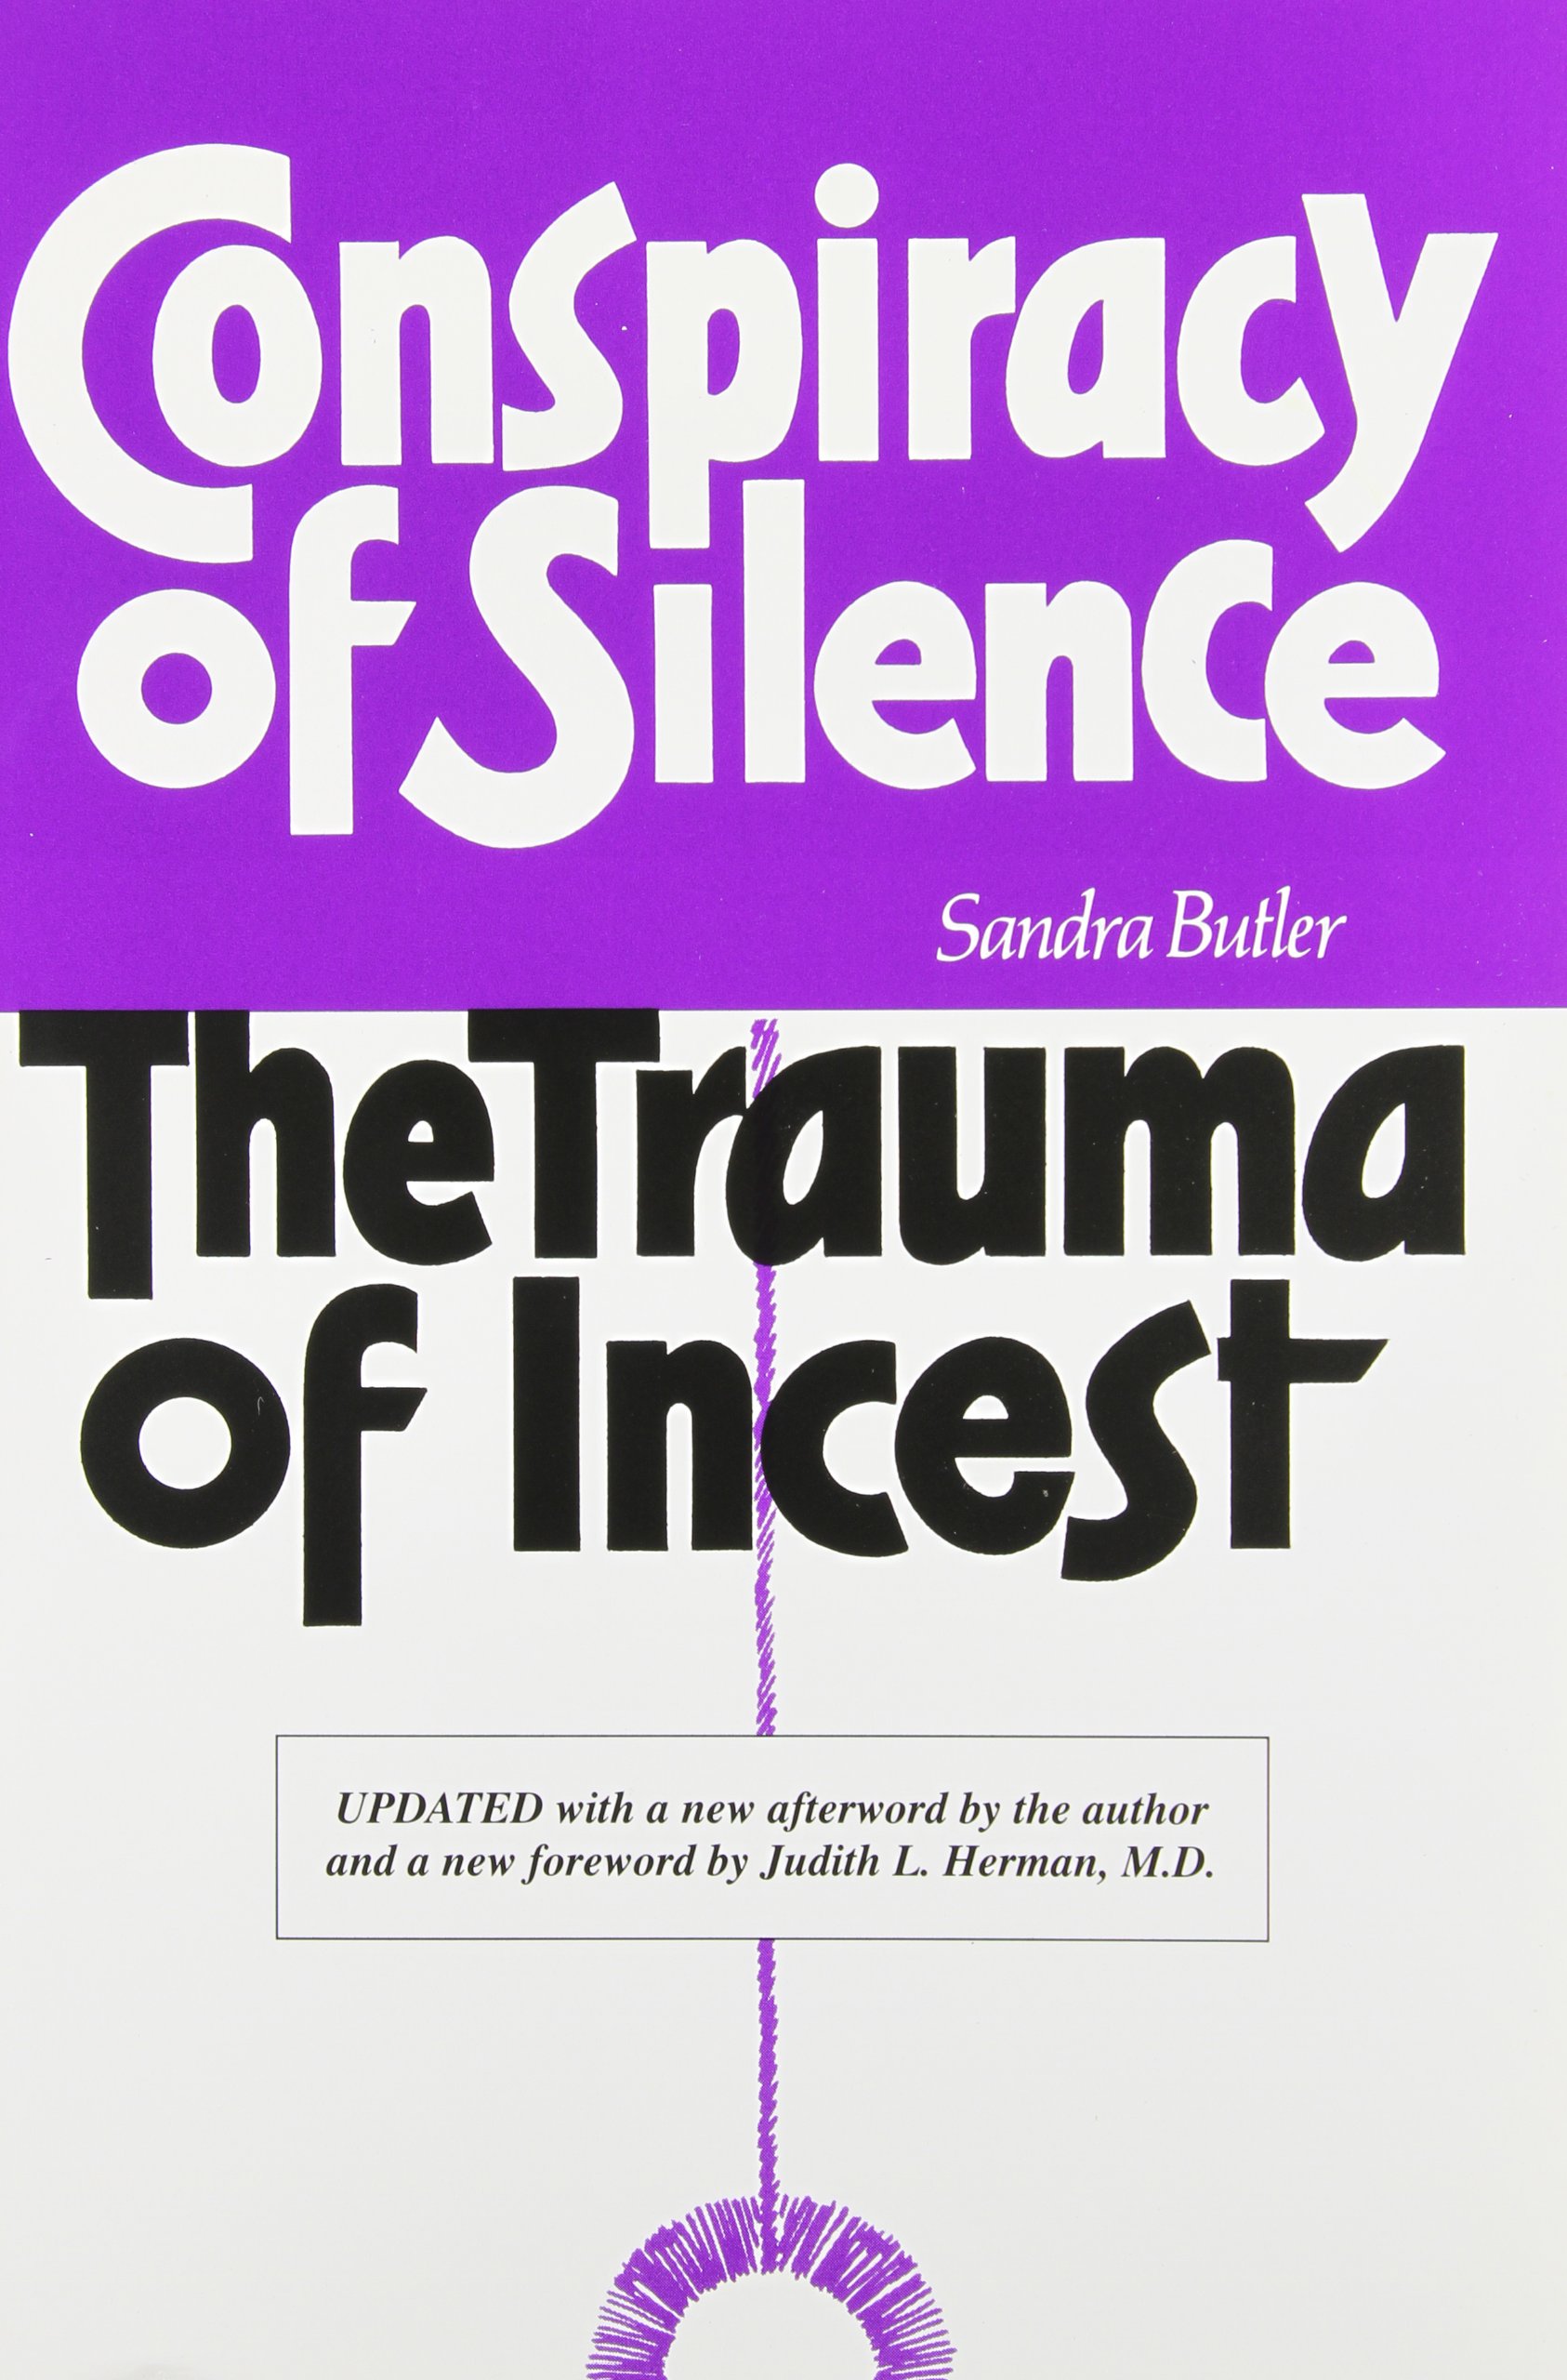 Book cover: Conspiracy of silence: The Trauma of Incest